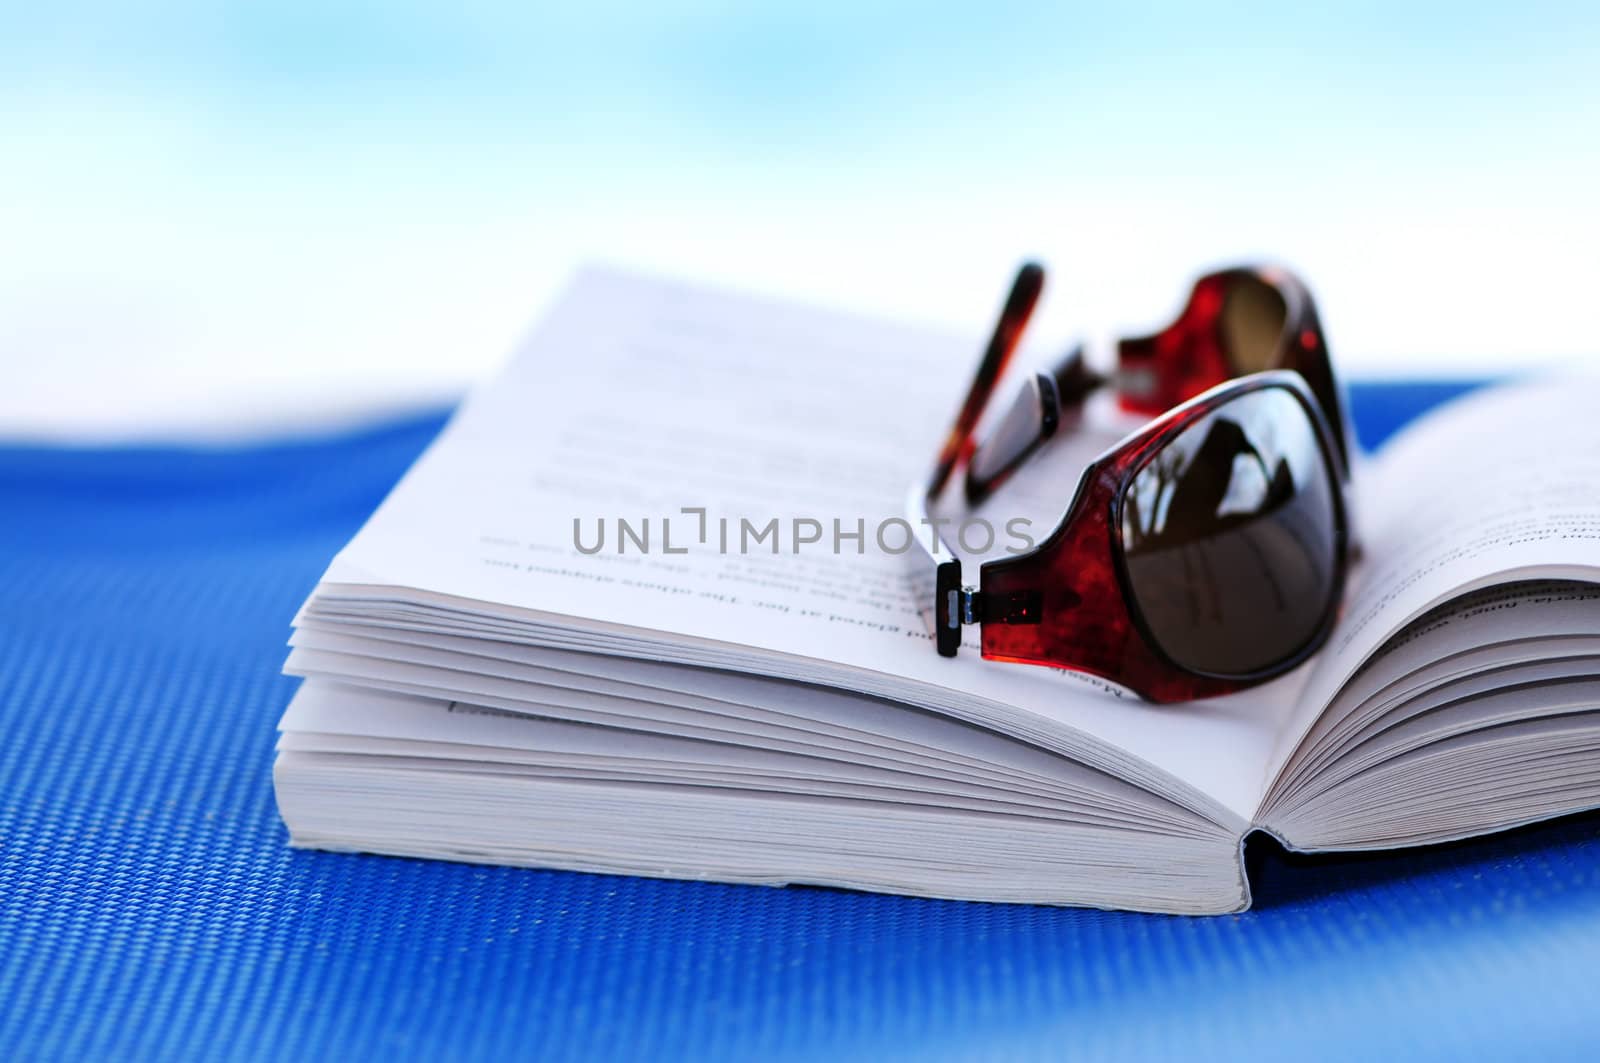 Sunglasses and open book on beach chair - summer vacation concept